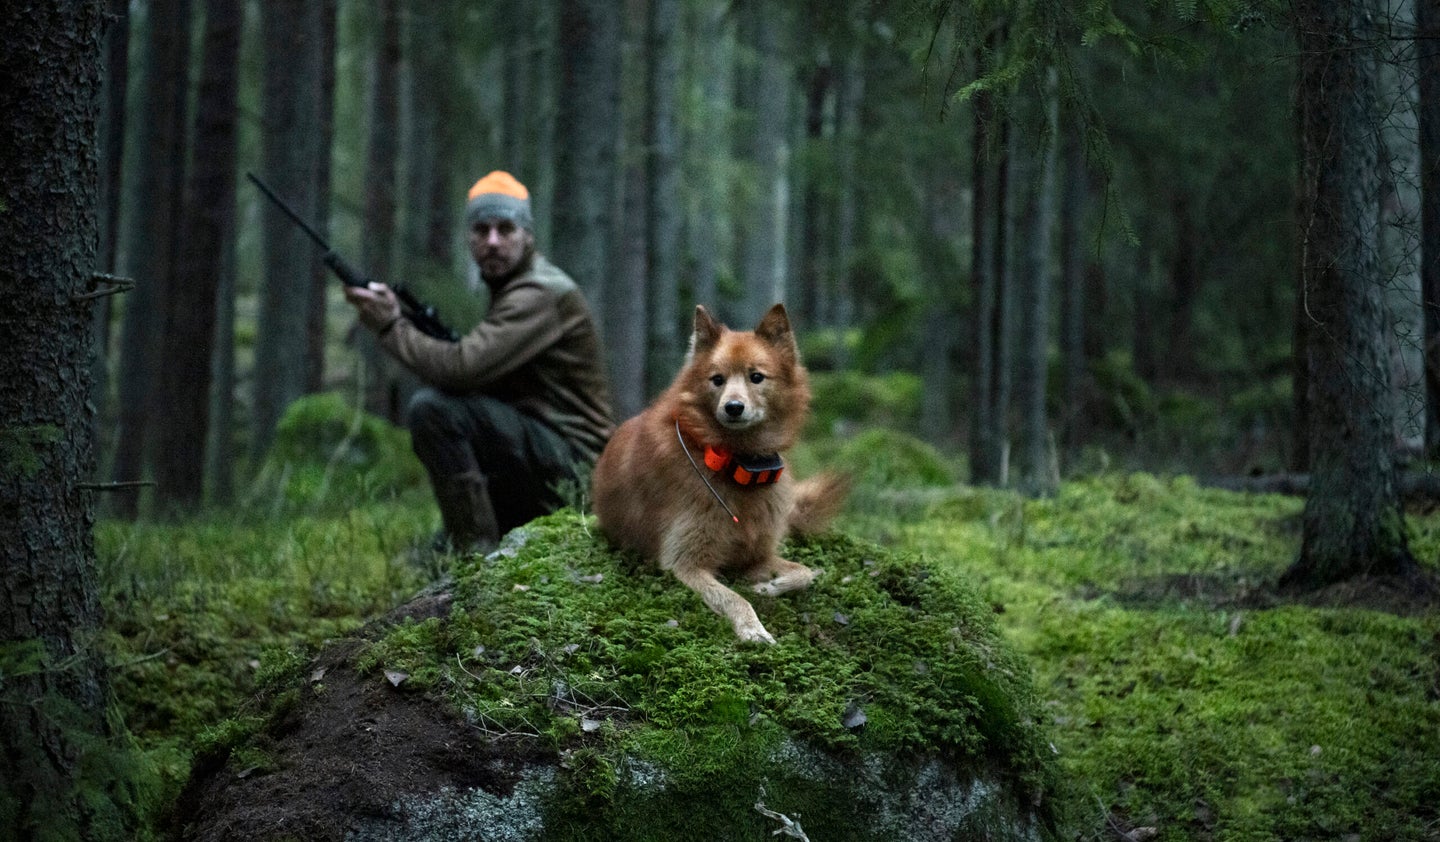 Hunting dog in forest, hunter in background